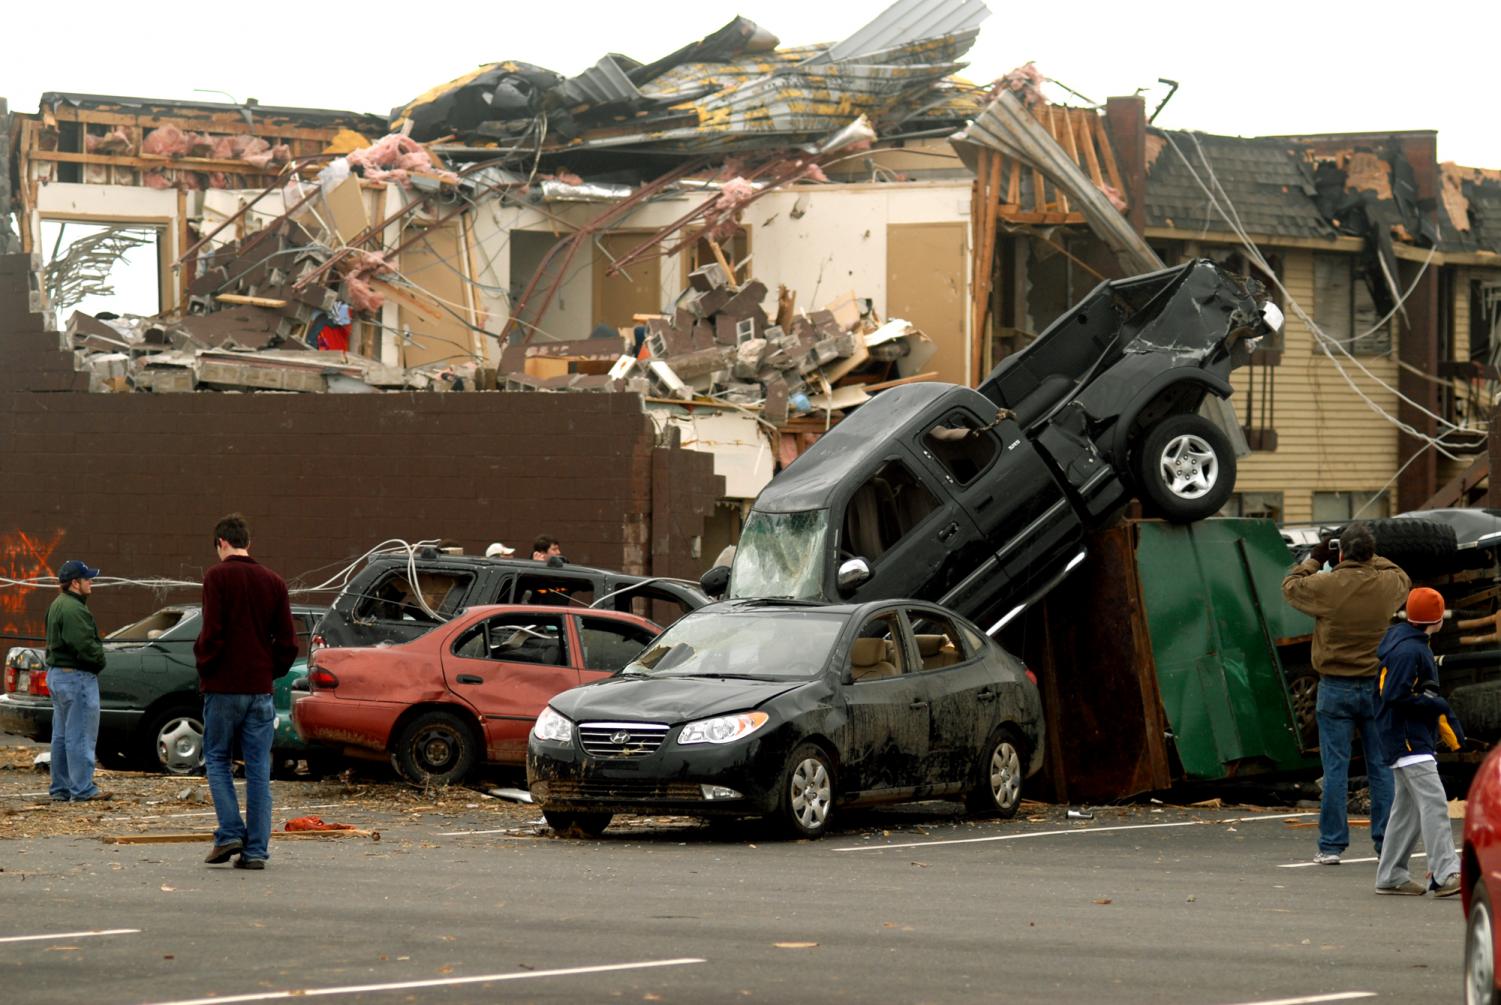 Students and their families survey tornado damage around campus dormitories at Union University on Wednesday, Feb. 6, 2008 in Jackson, Tenn. The storm, which hit Tuesday night, collapsed buildings, flipped cars and sent about 50 students to the hospital.